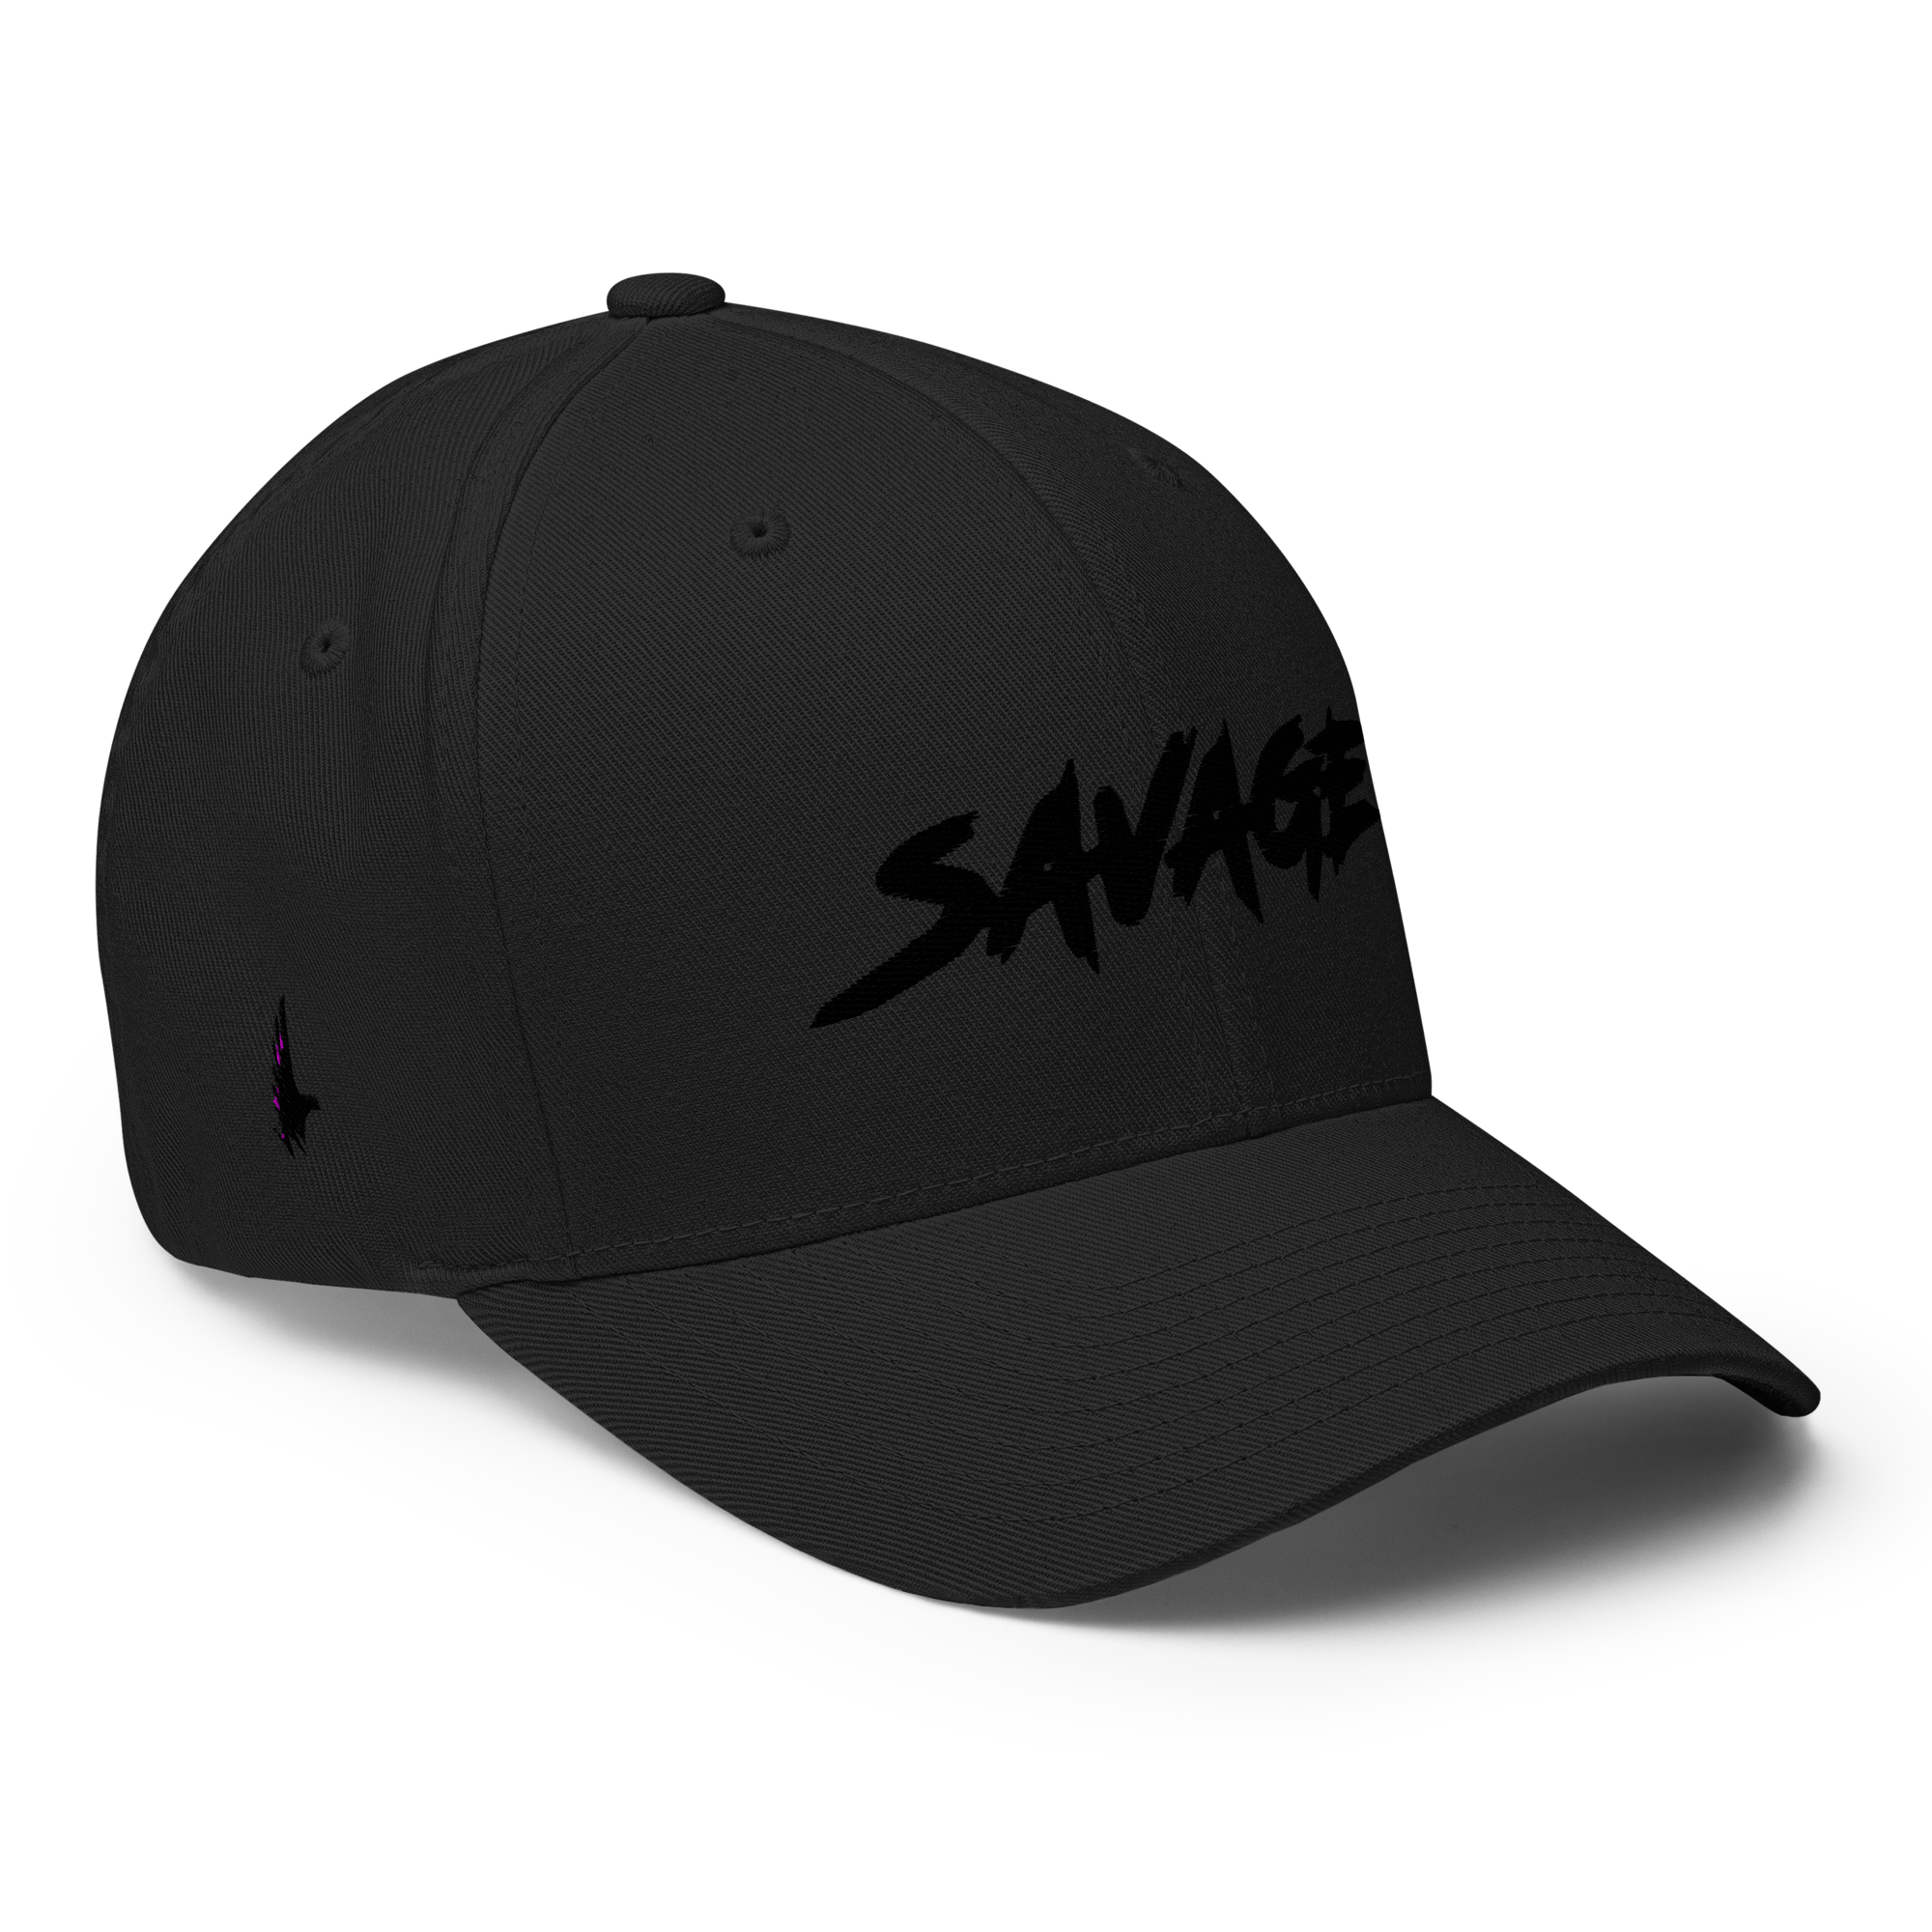 Savage Fitted Hat Black Out - Loyalty Vibes